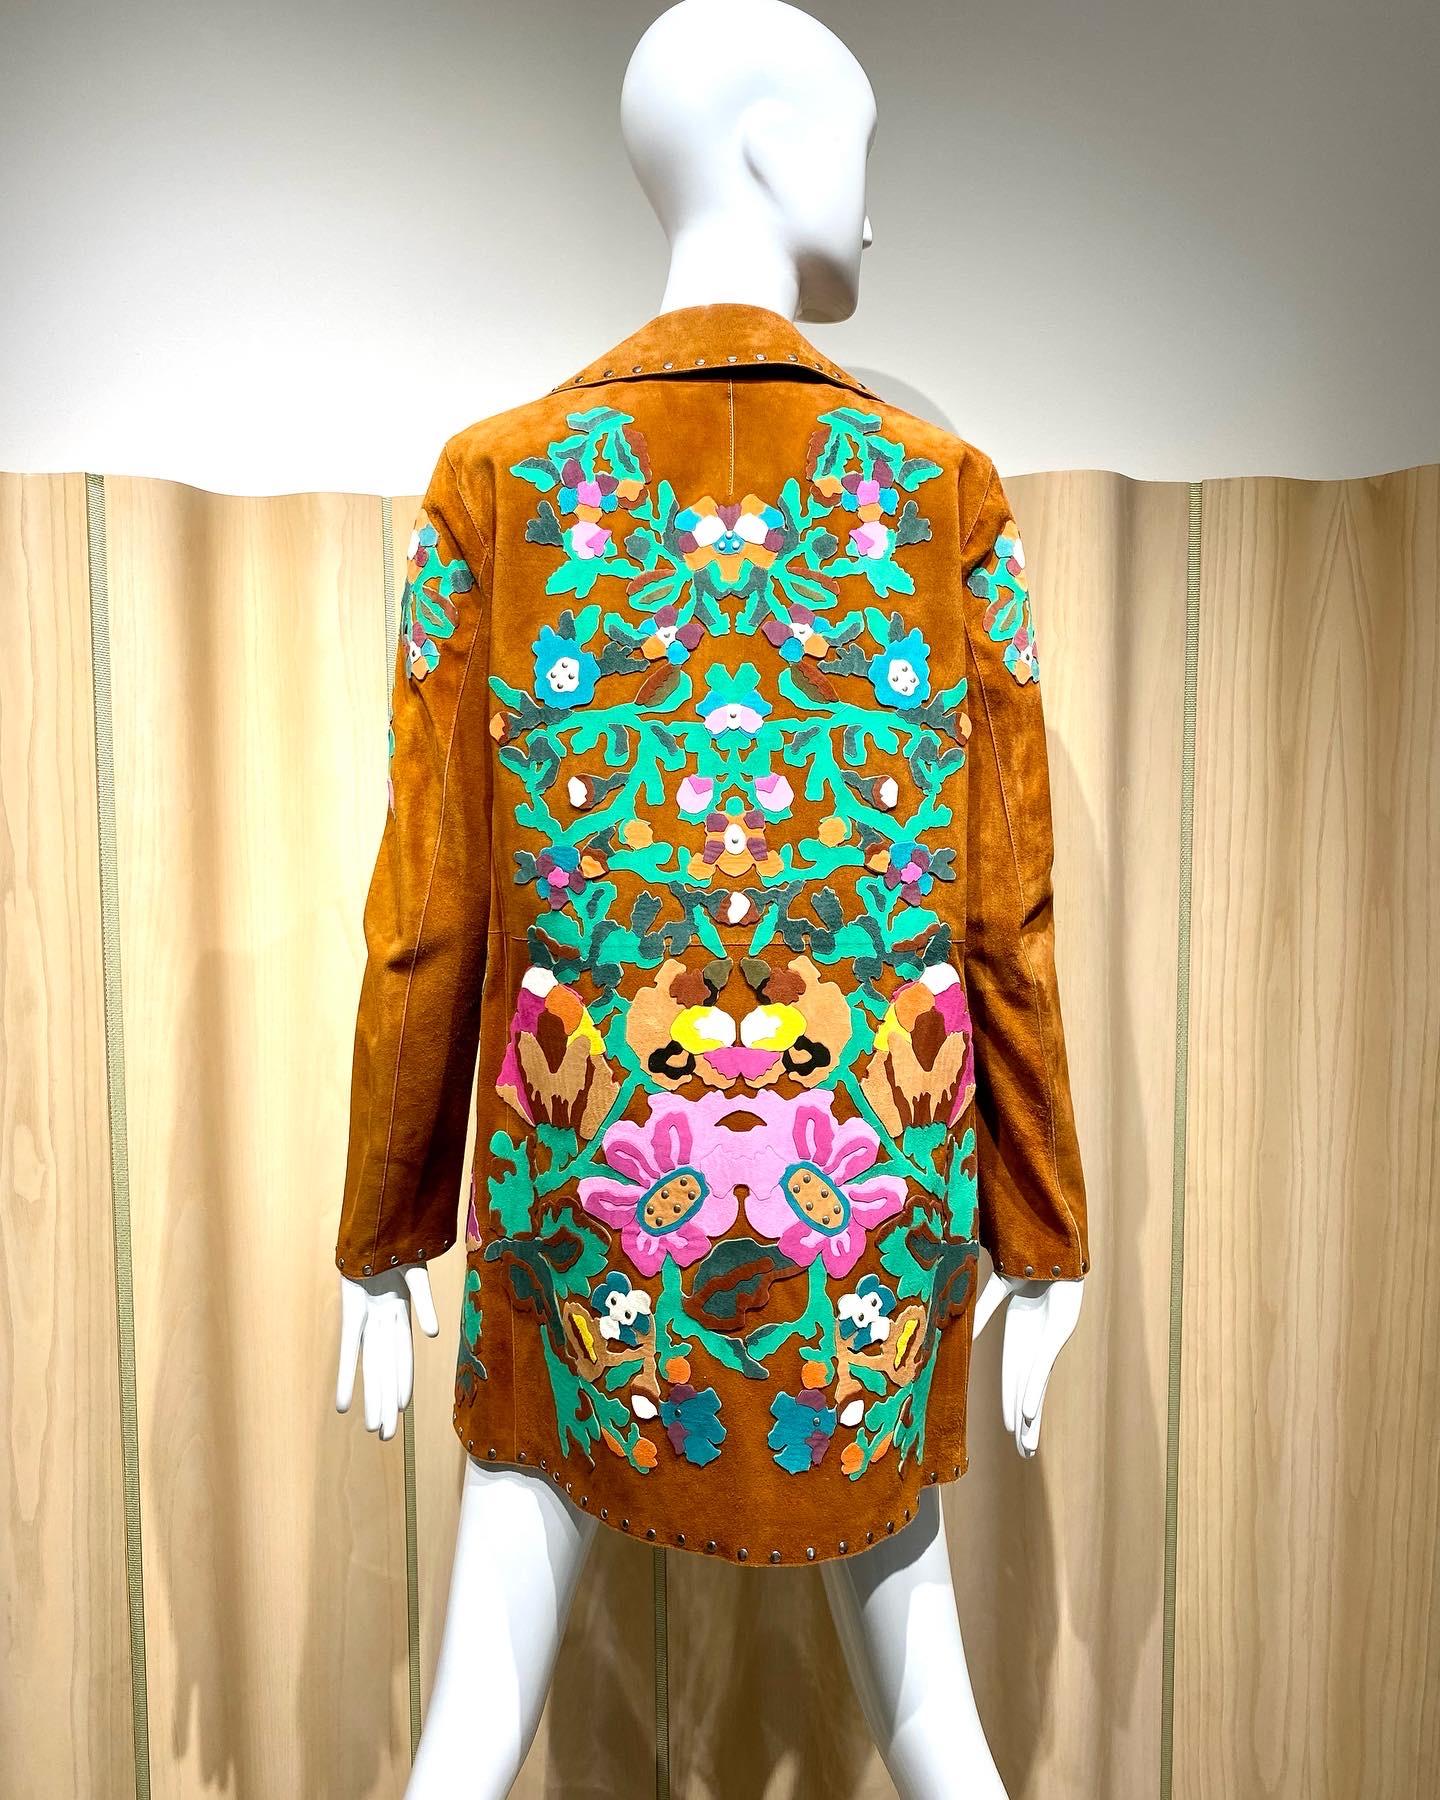 2000s Valentino Suede Jacket/ Coat  western style embroidered with green, fuschia, White, yellow and brown suede floral cut out. 
Jacket/ coat marked size 6
Measurement:  Shoulder : 16” / B 38” / W 38” / H 42” / Sleeve: 23” / Coat Length: 30”